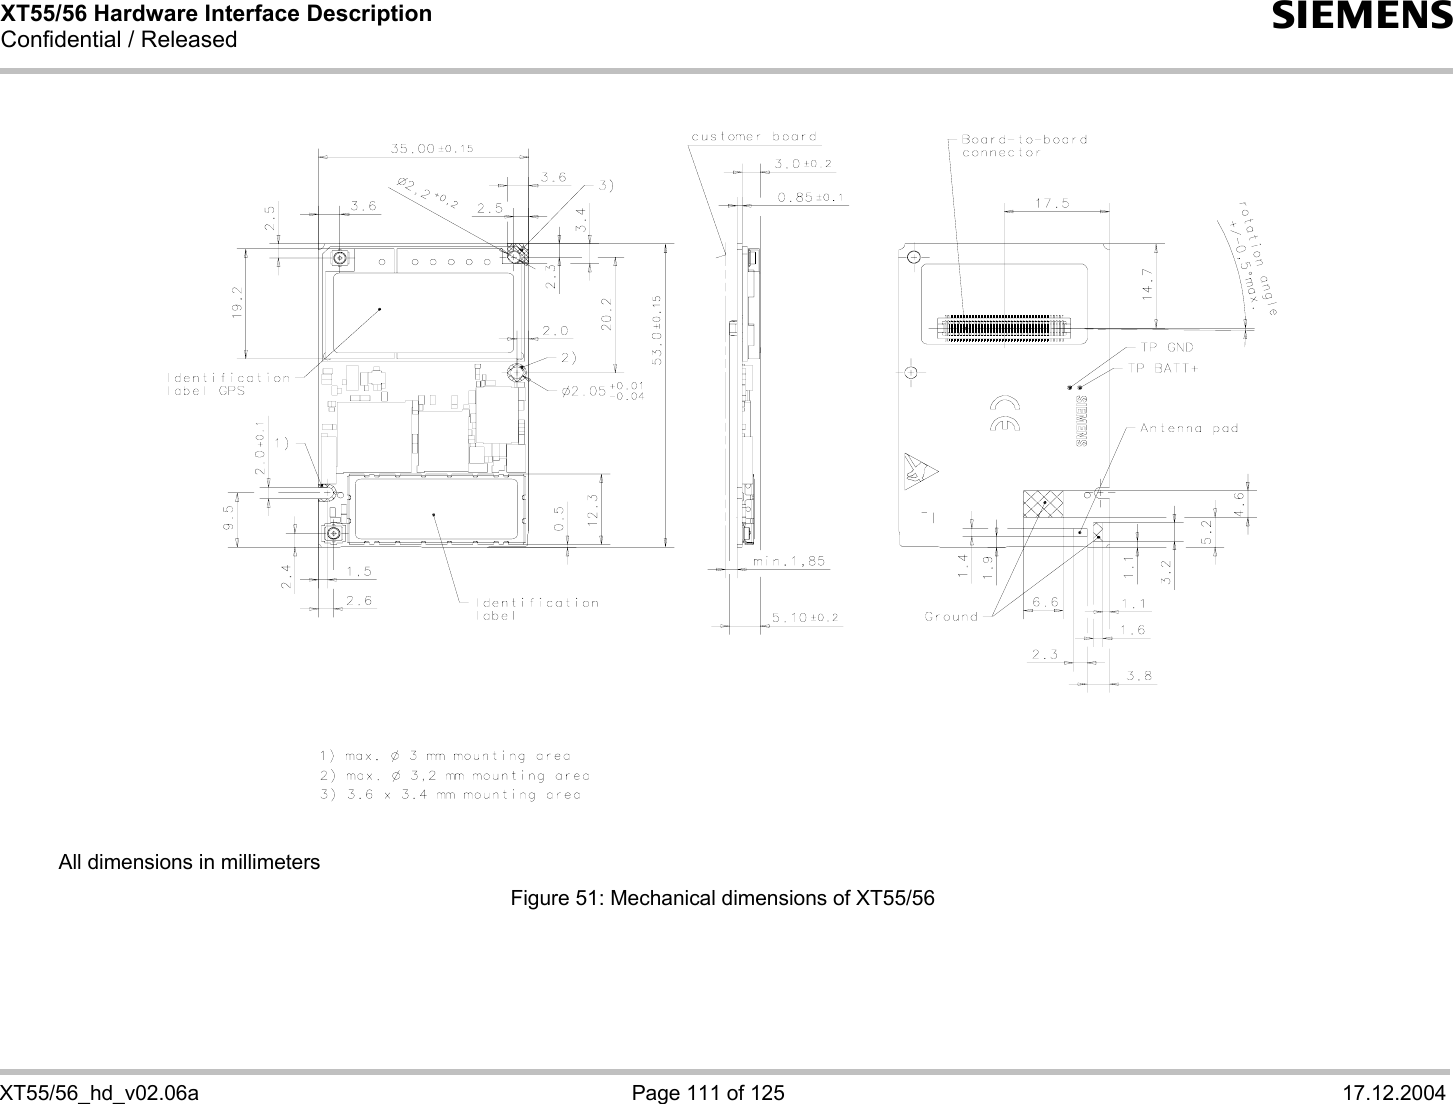 XT55/56 Hardware Interface Description Confidential / Released s   XT55/56_hd_v02.06a  Page 111 of 125  17.12.2004        All dimensions in millimeters Figure 51: Mechanical dimensions of XT55/56   